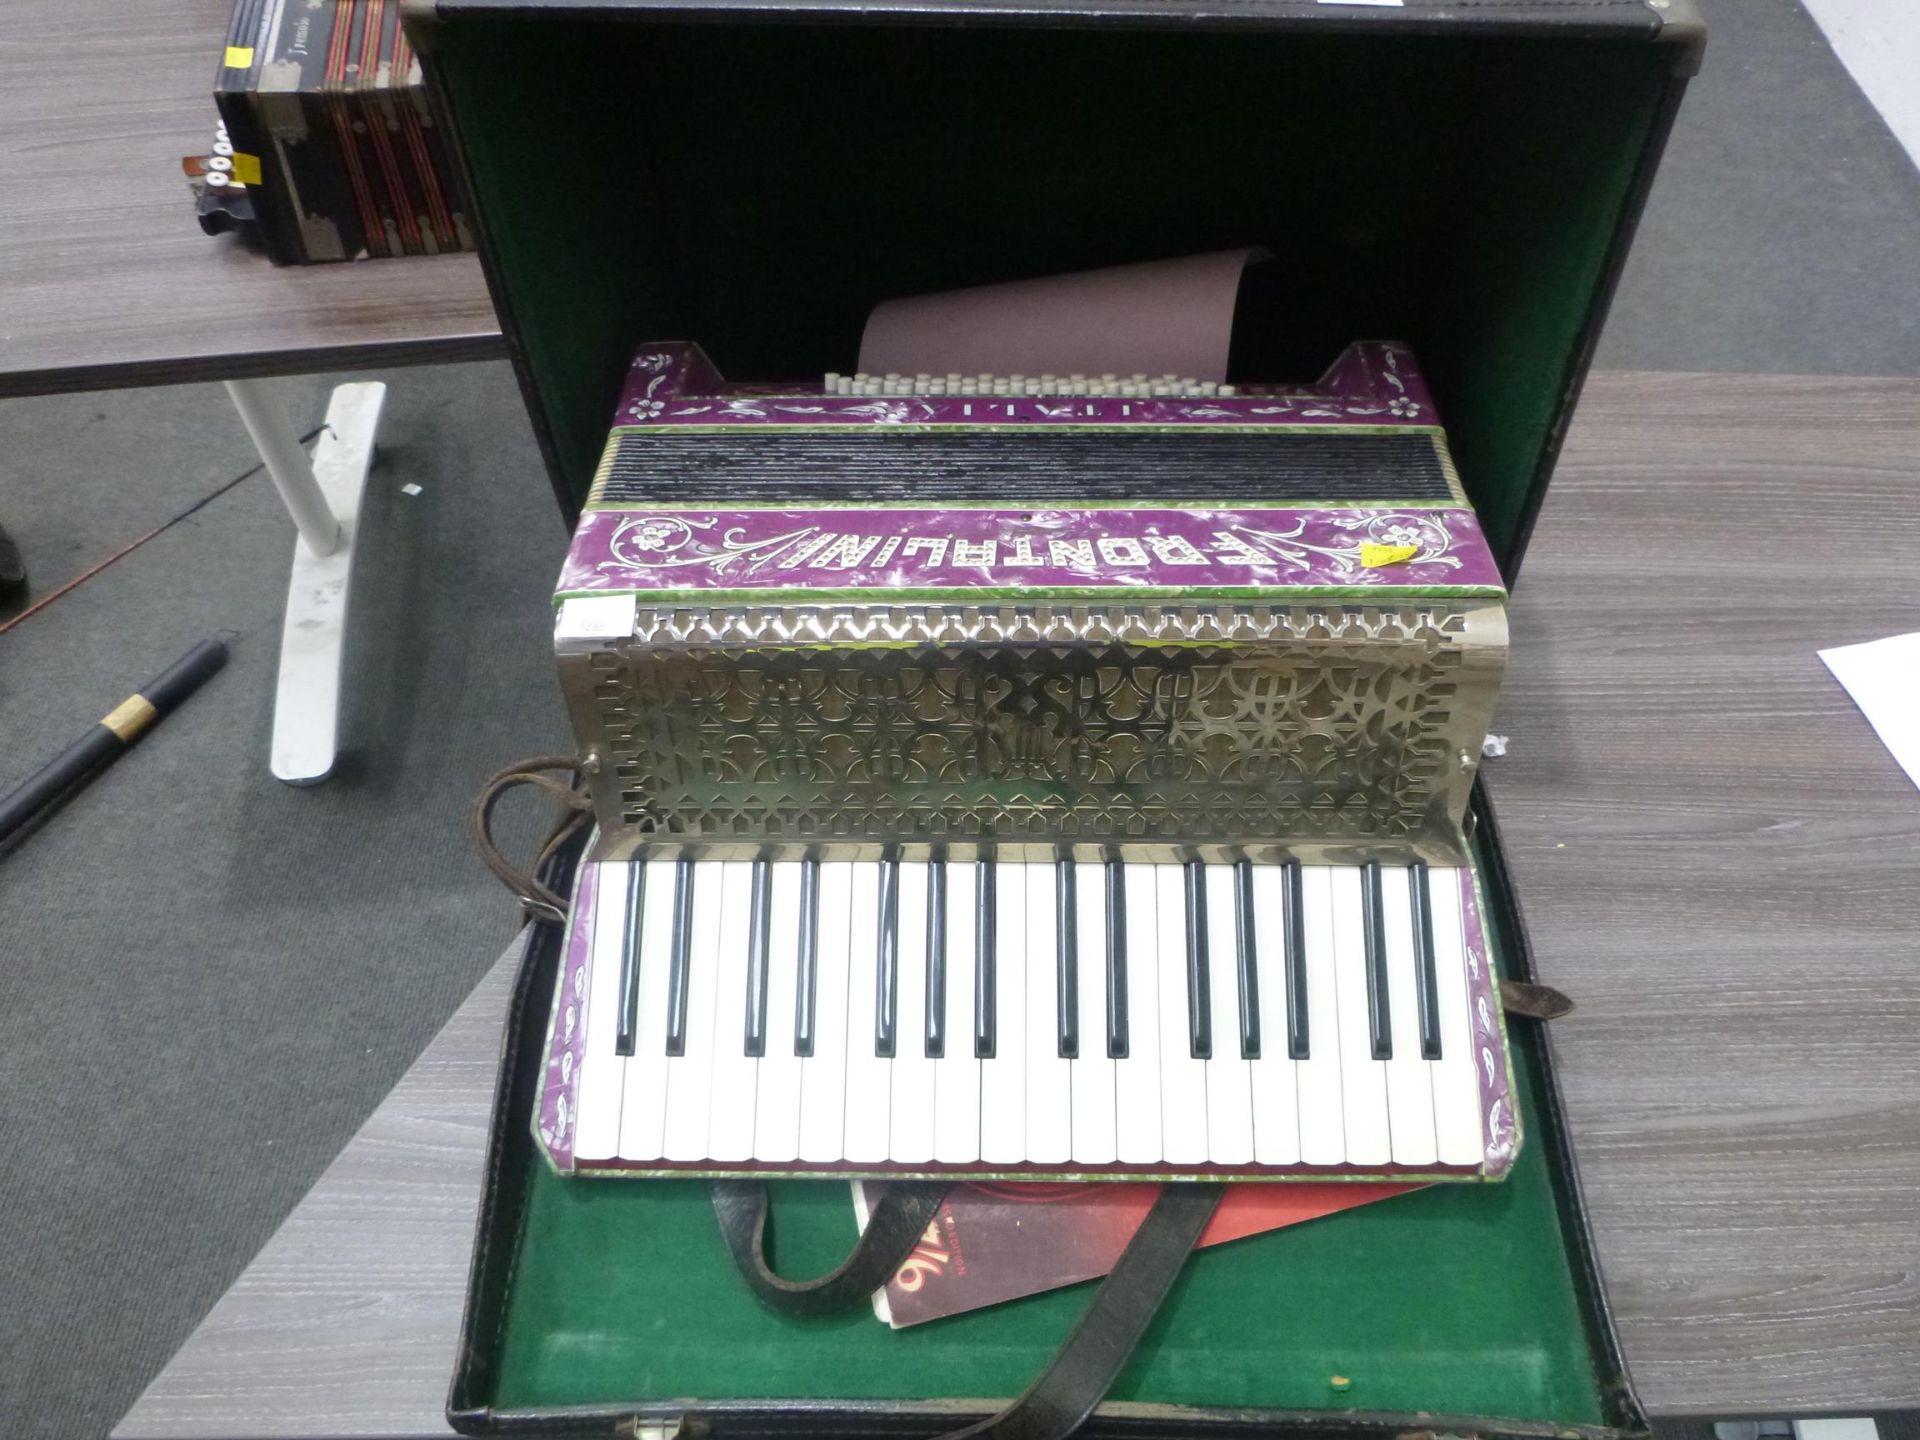 A full size Italia Frontalini Accordian - stamped number 787 in bespoke carry case (est. £50-£100)